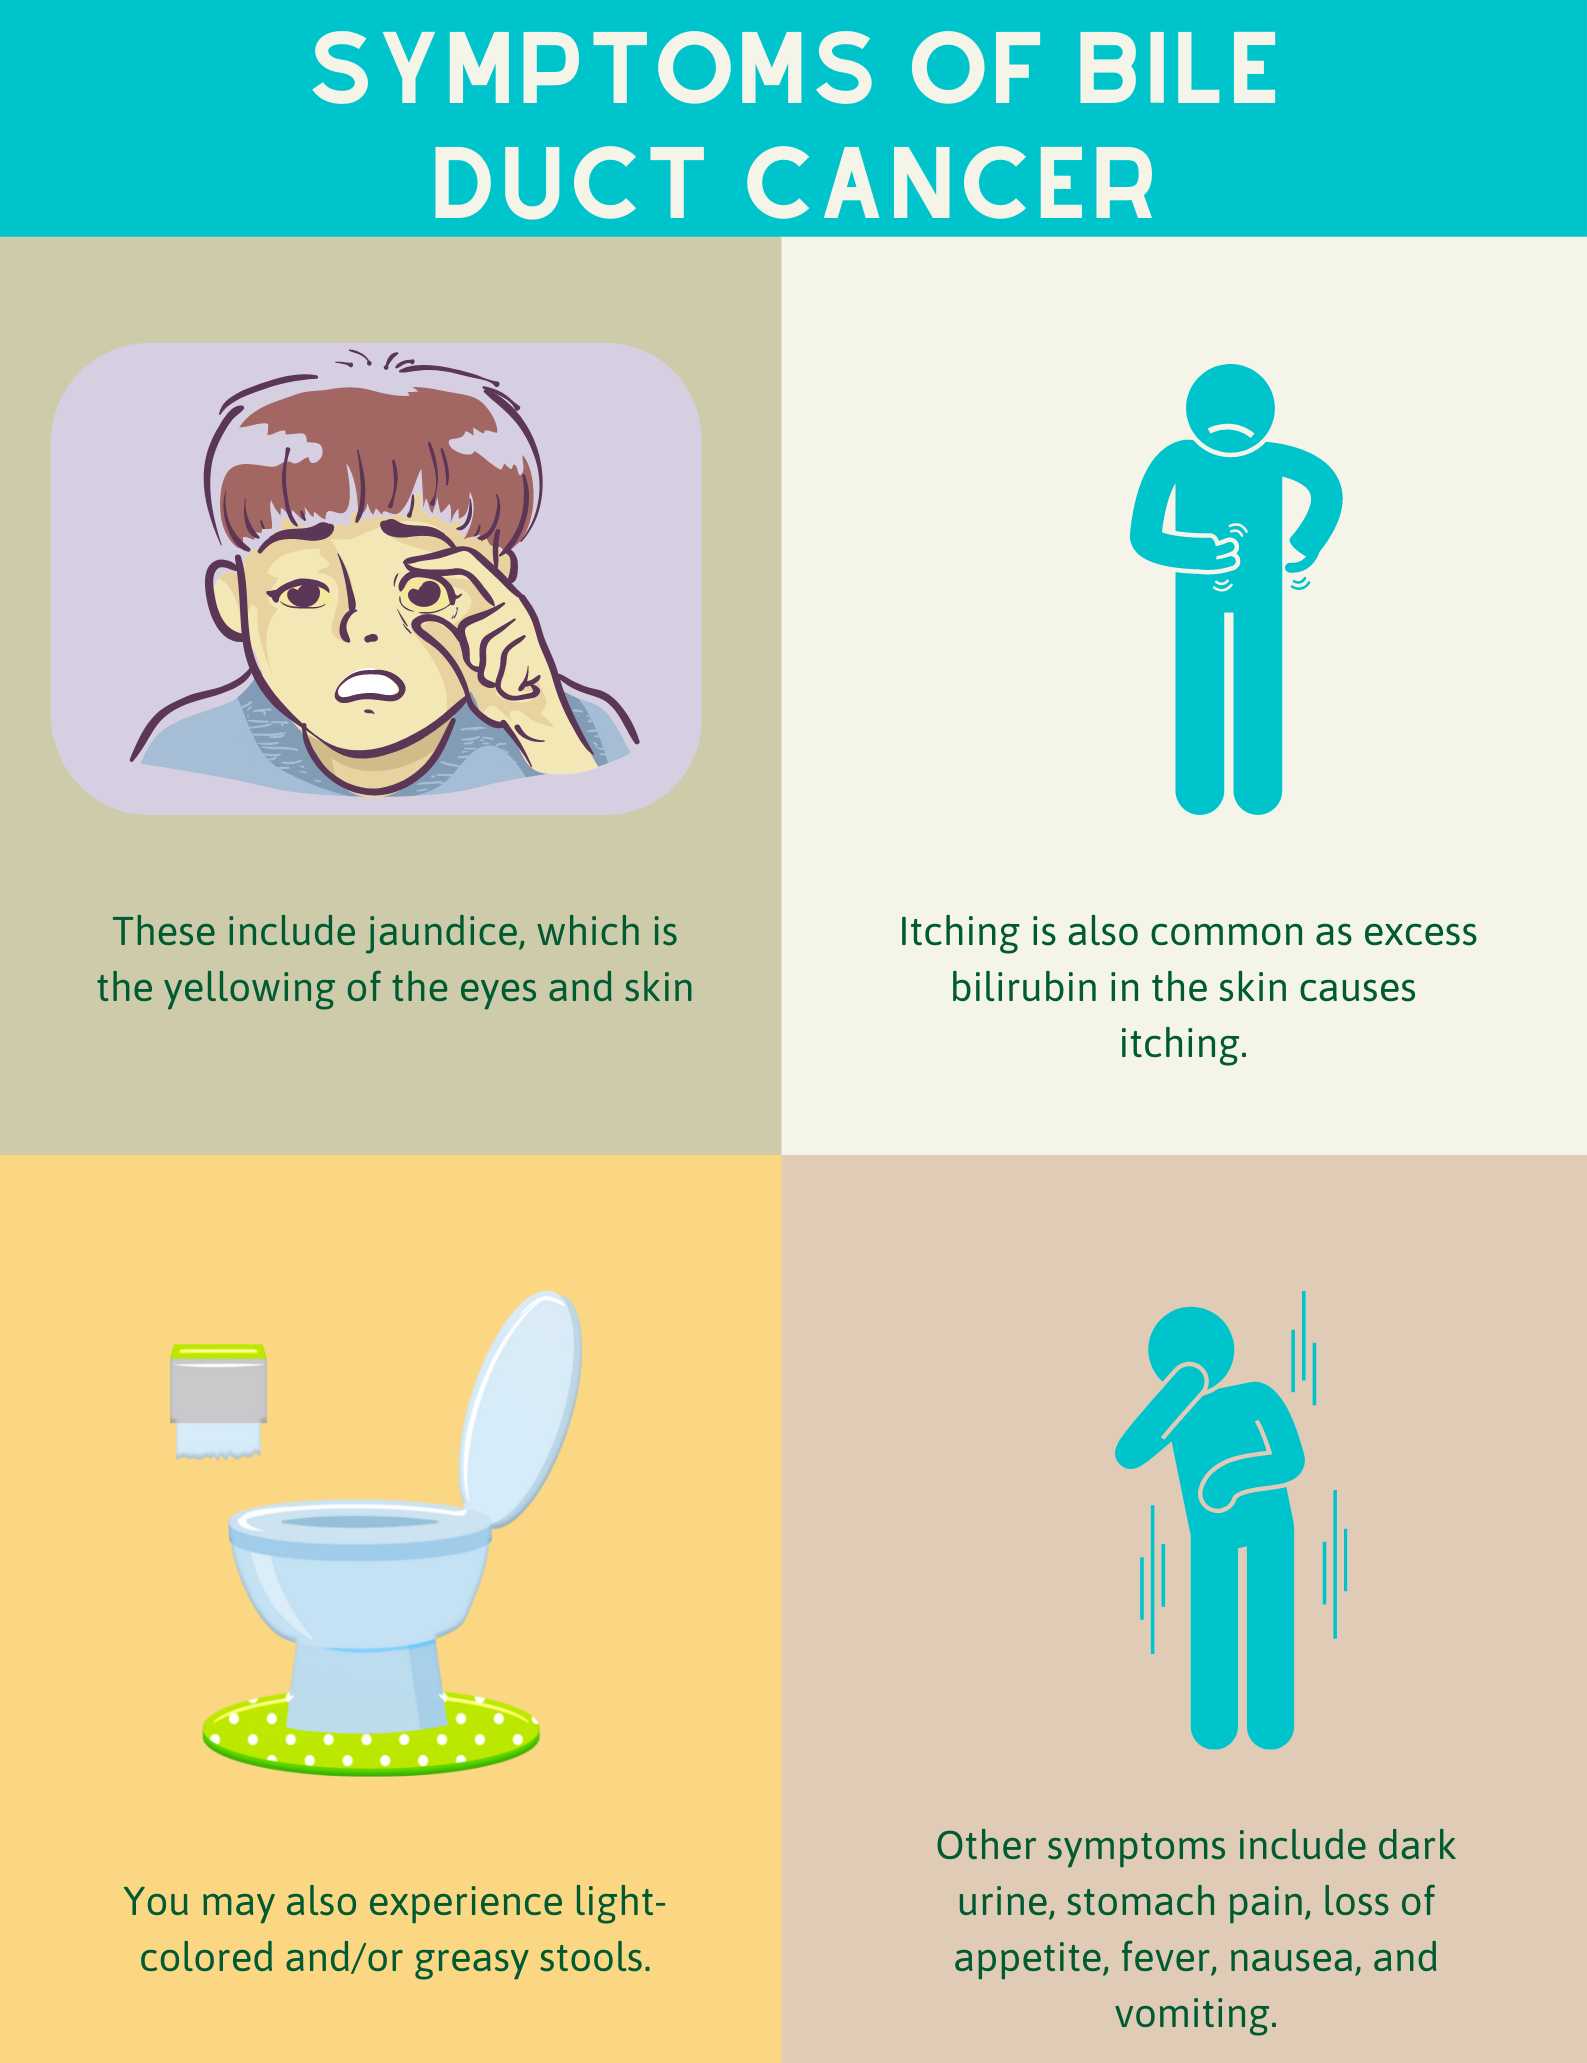 Symptoms of Bile Duct Cancer Image